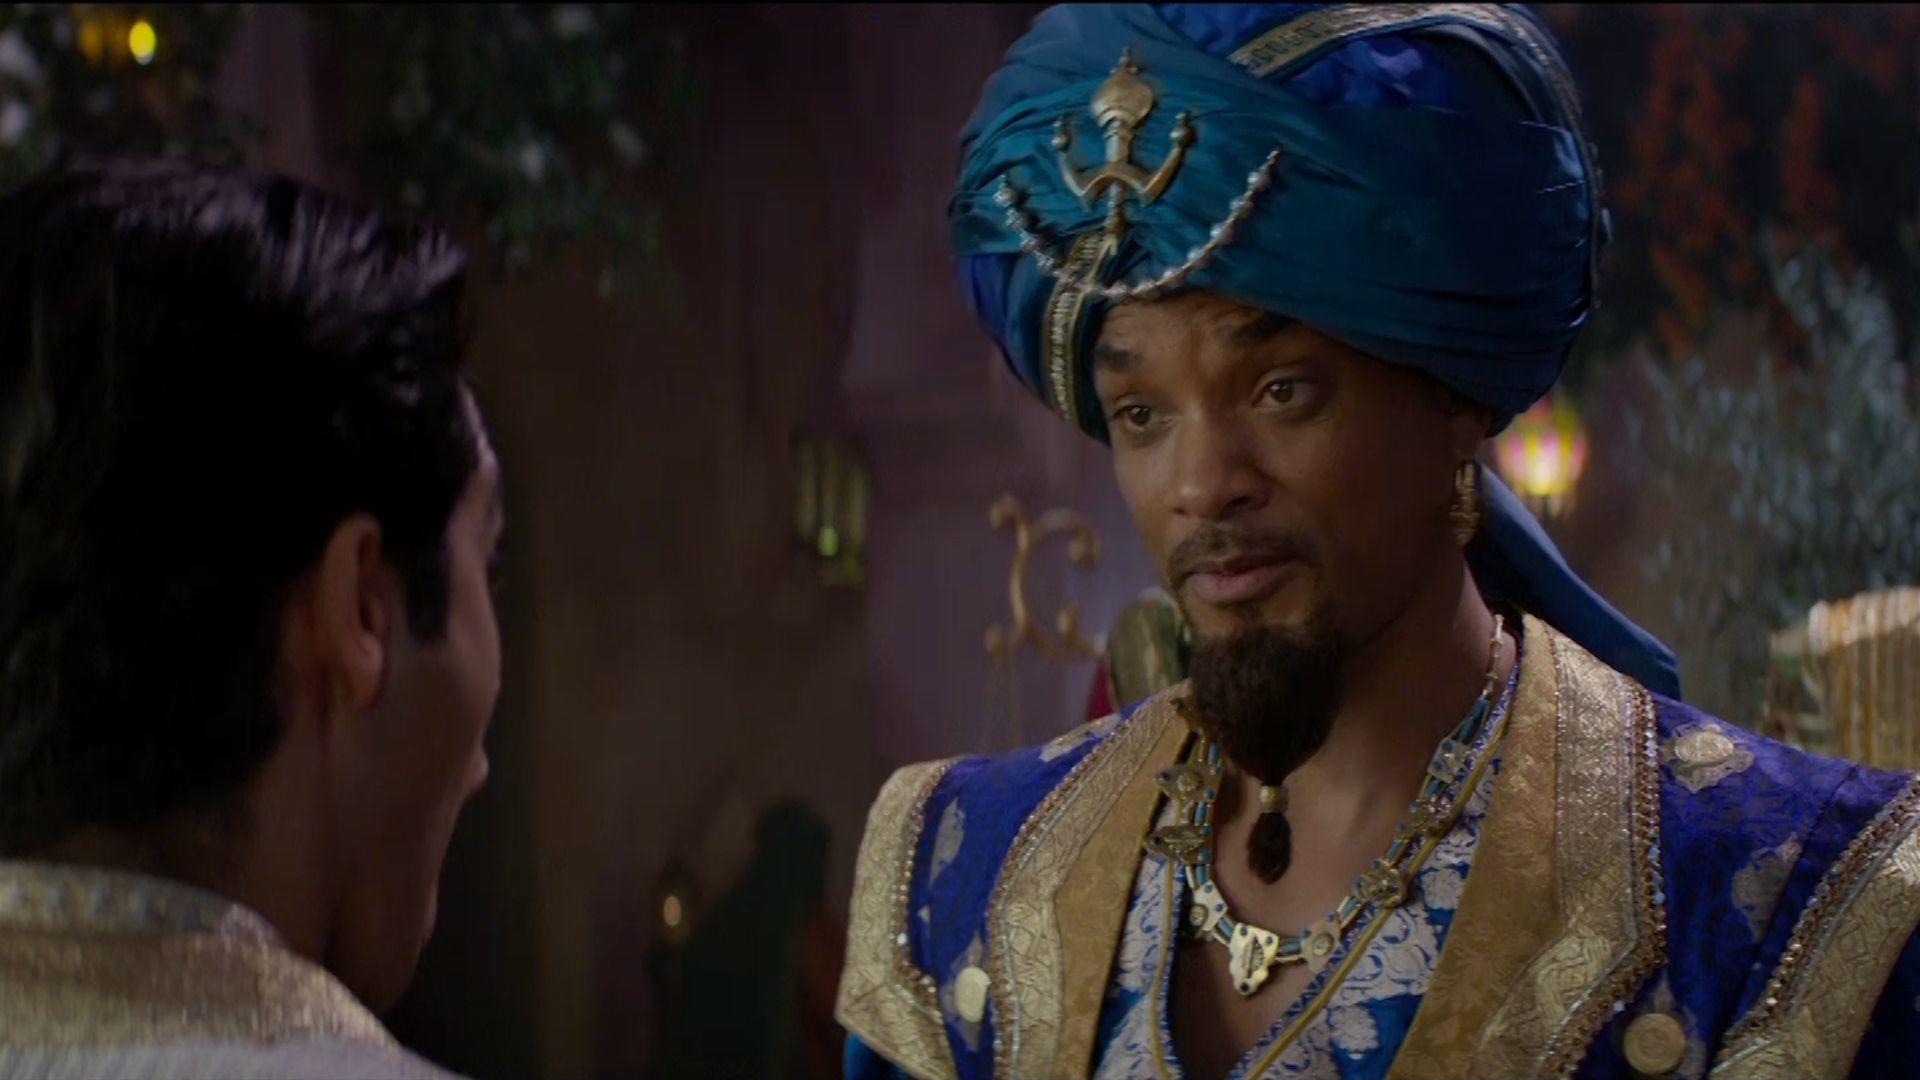 New 'Aladdin' trailer gives best look yet at Will Smith as 'Genie